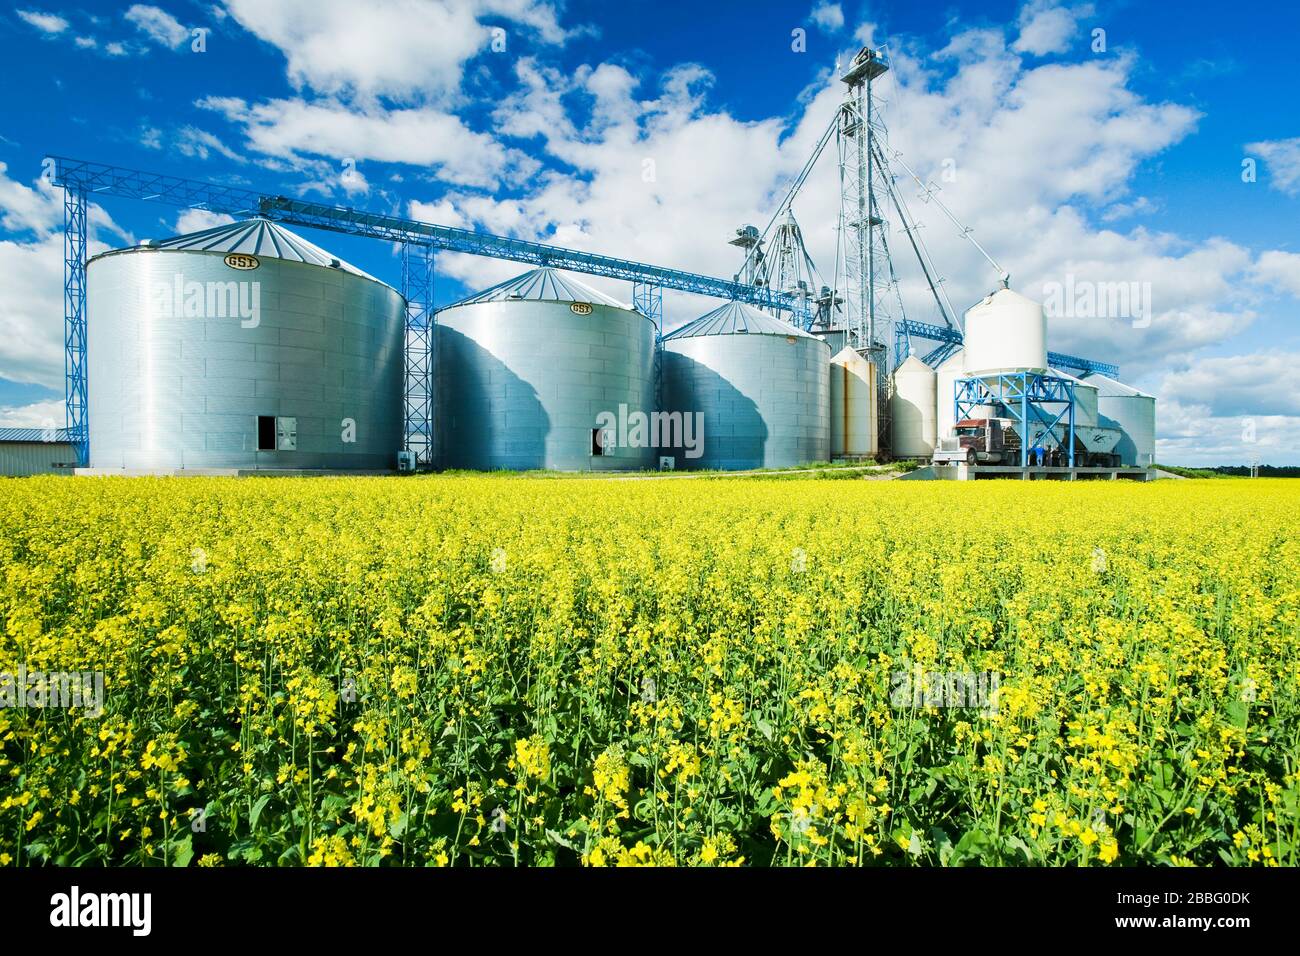 a field of bloom stage canola with grain handling structure, including storage bins(silos), in the background,  near Somerset, Manitoba, Canada Stock Photo